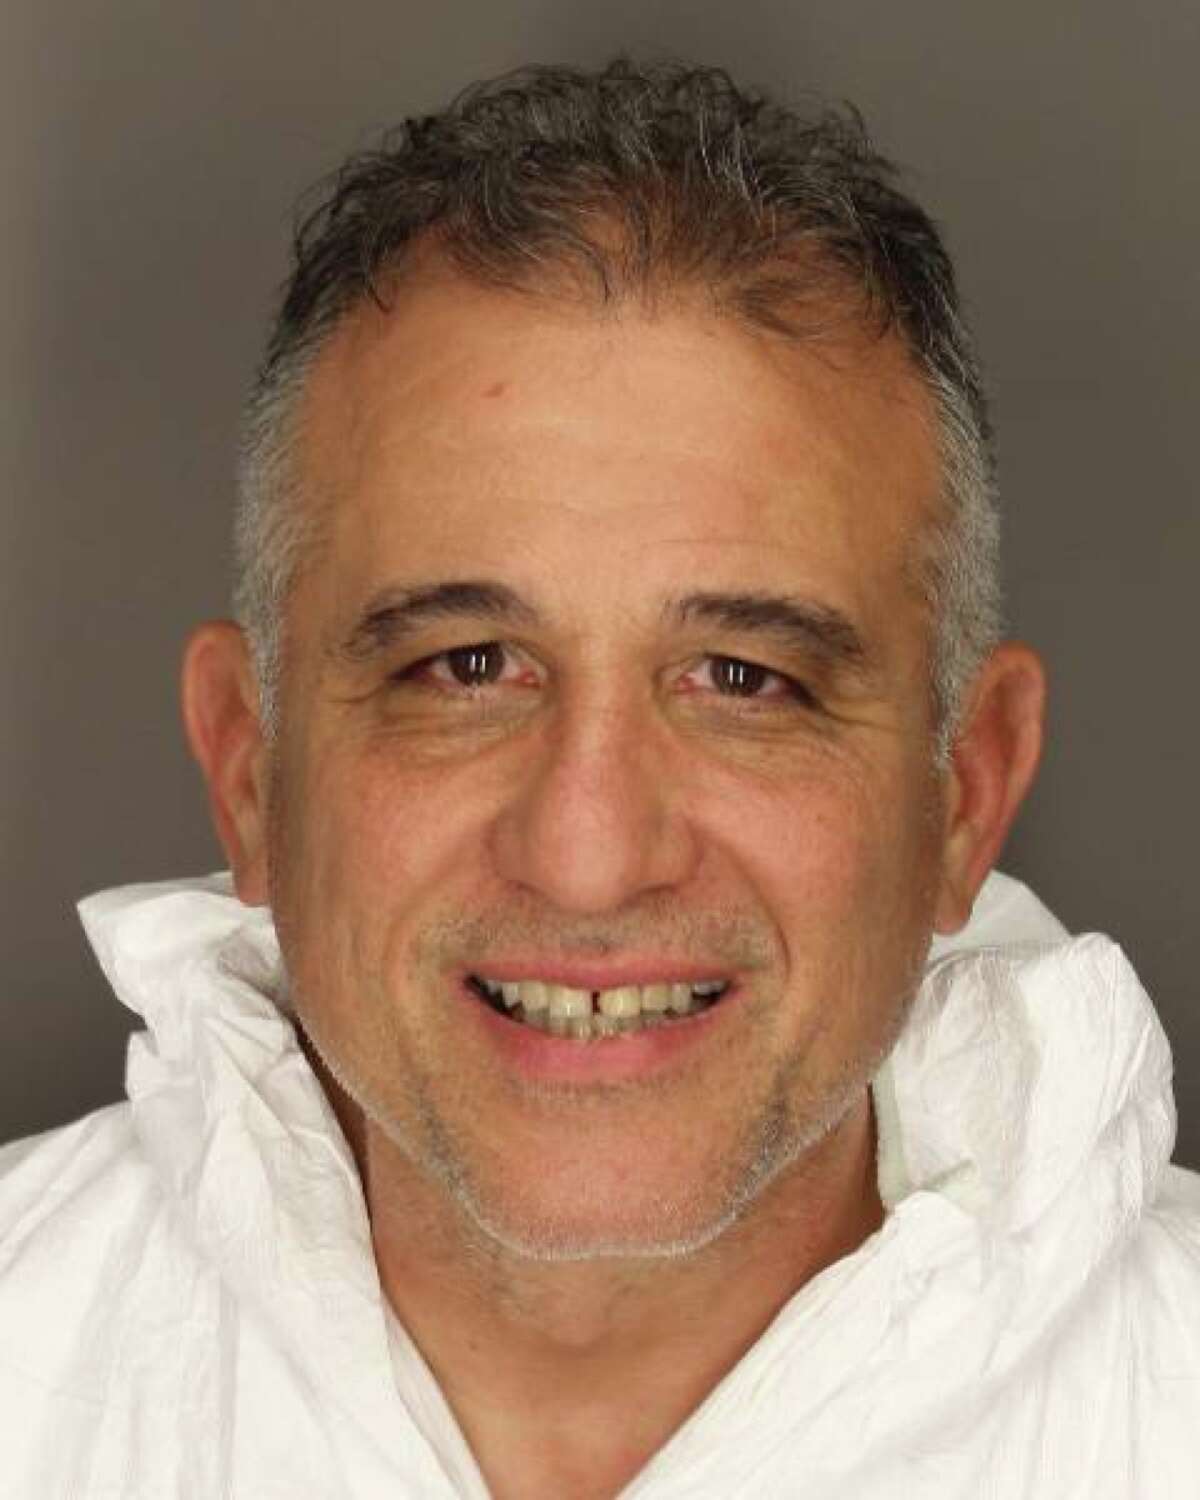 Michael S. Barone, a former Albany police lieutenant accused of shooting a man earlier this week in a Rensselaer home, is due in court on Friday.